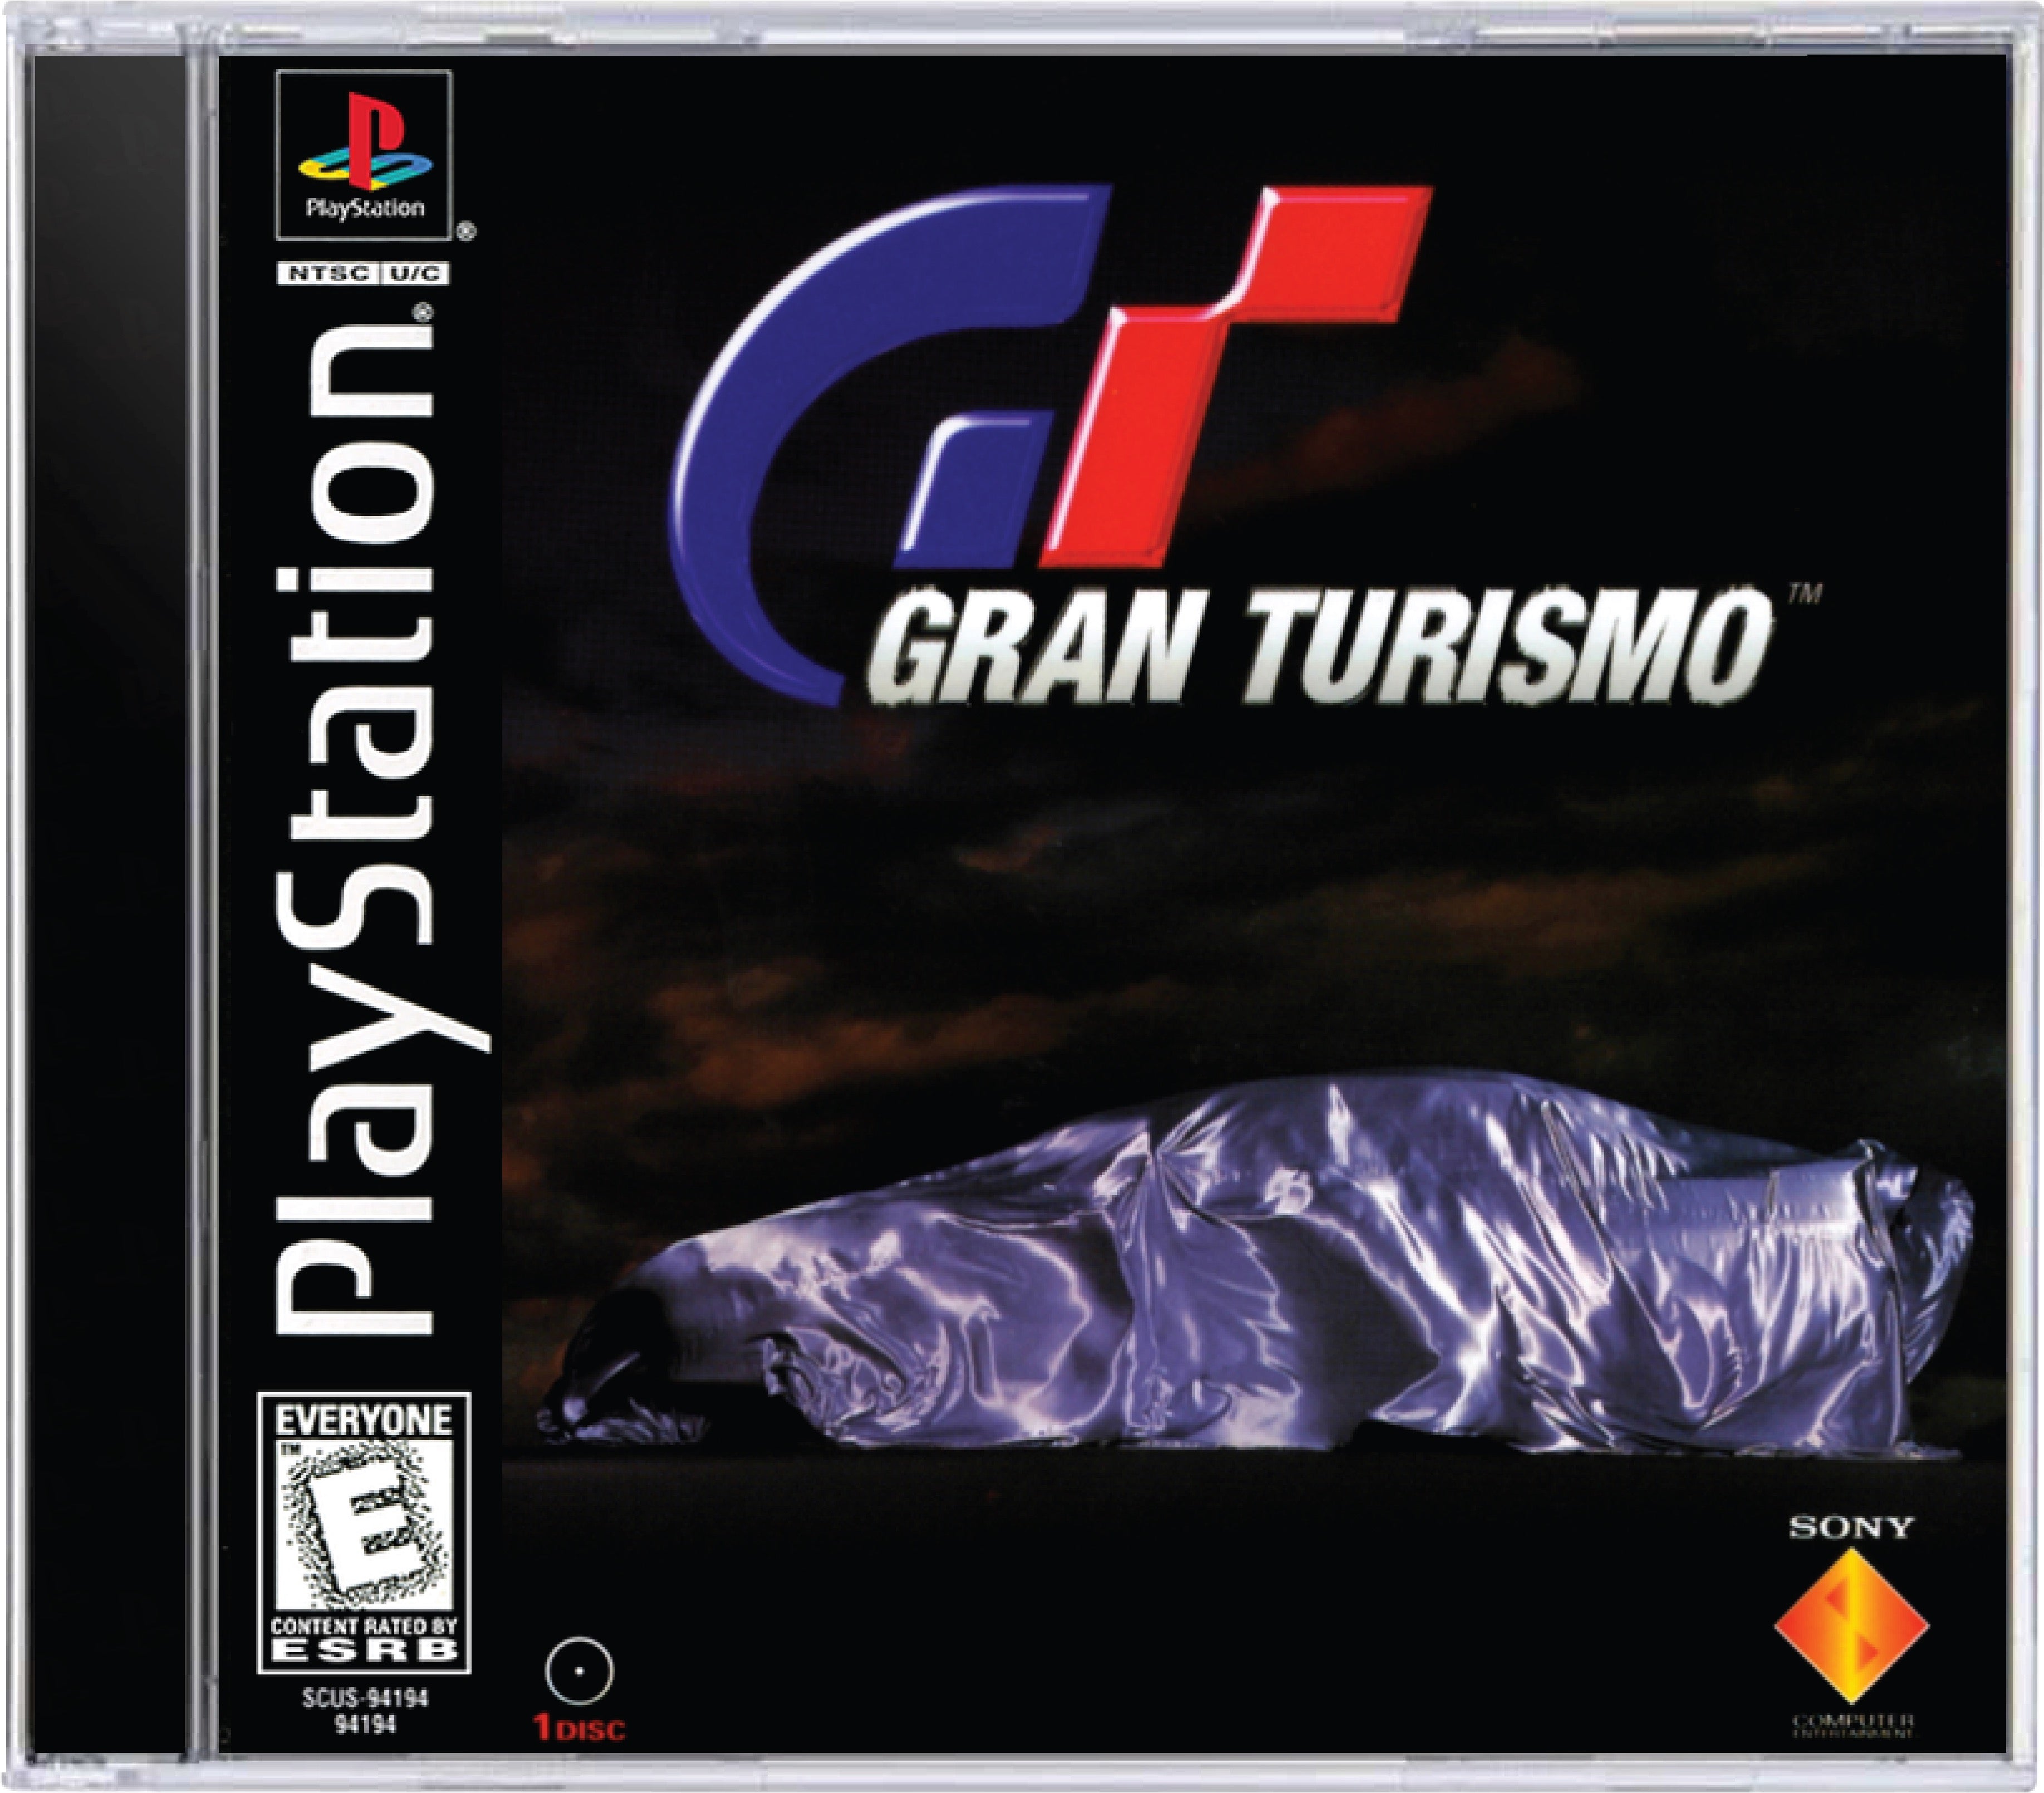 Gran Turismo Cover Art and Product Photo